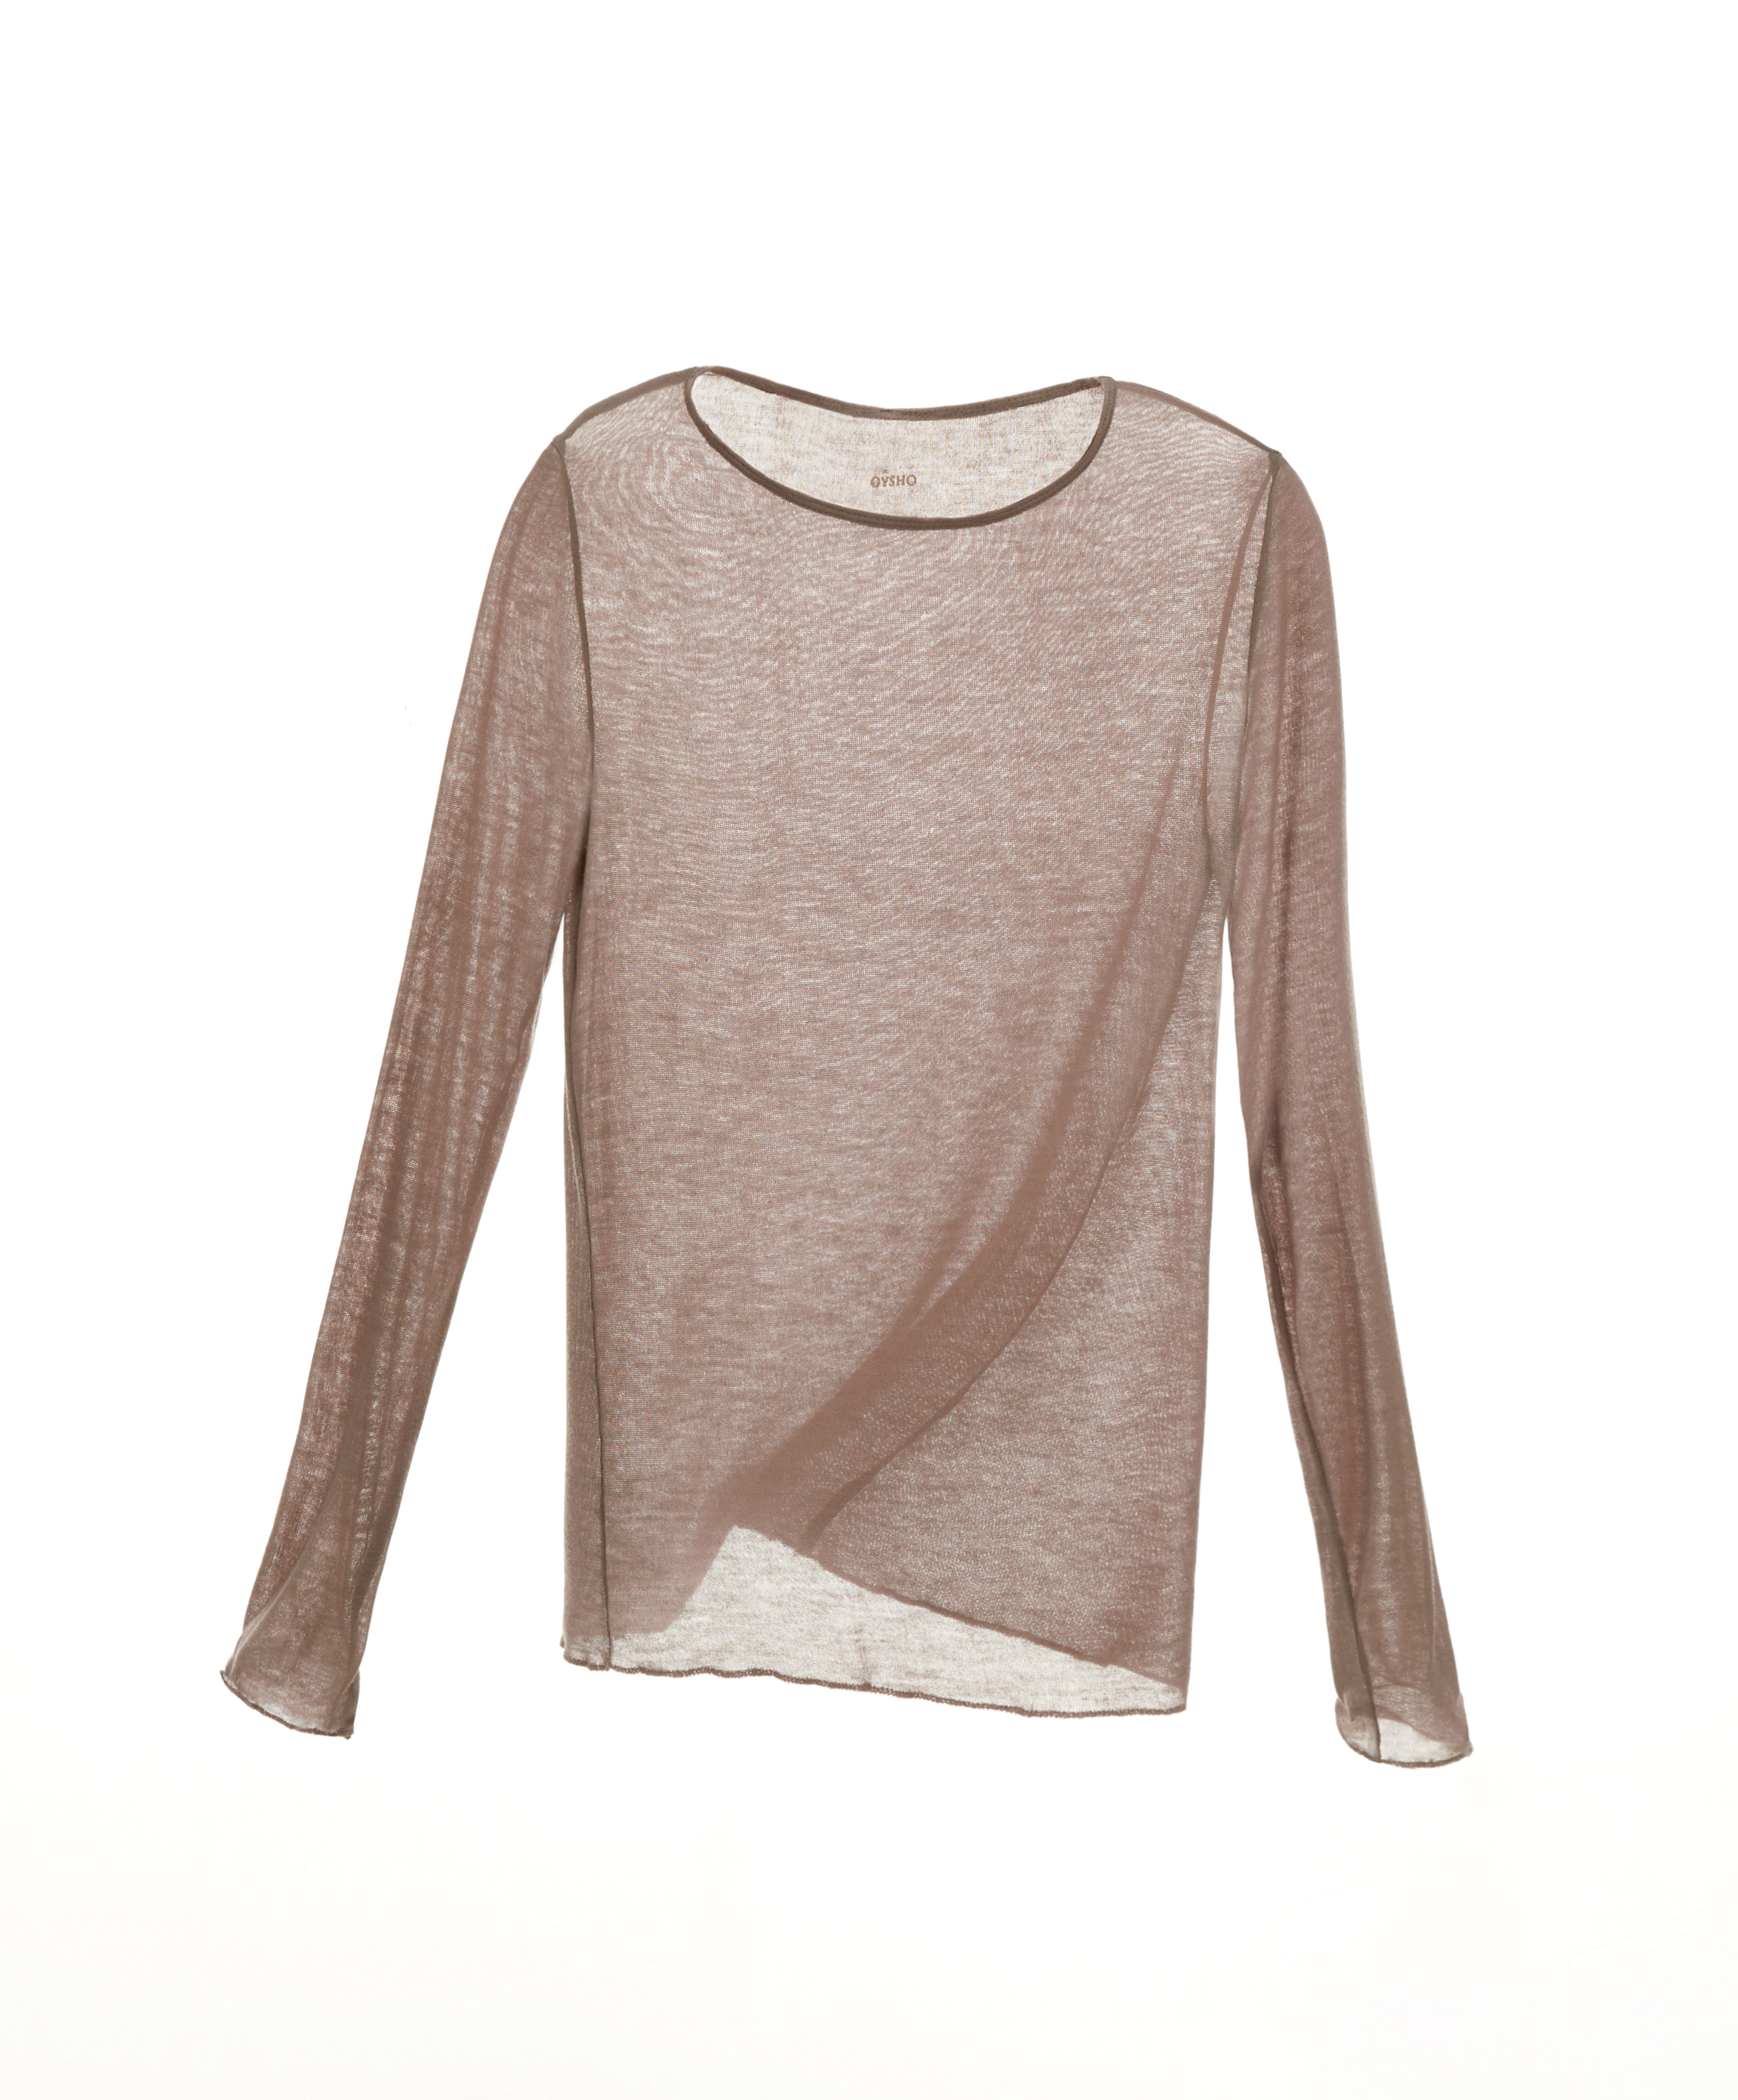 Extra-fine knit long-sleeved T-shirt